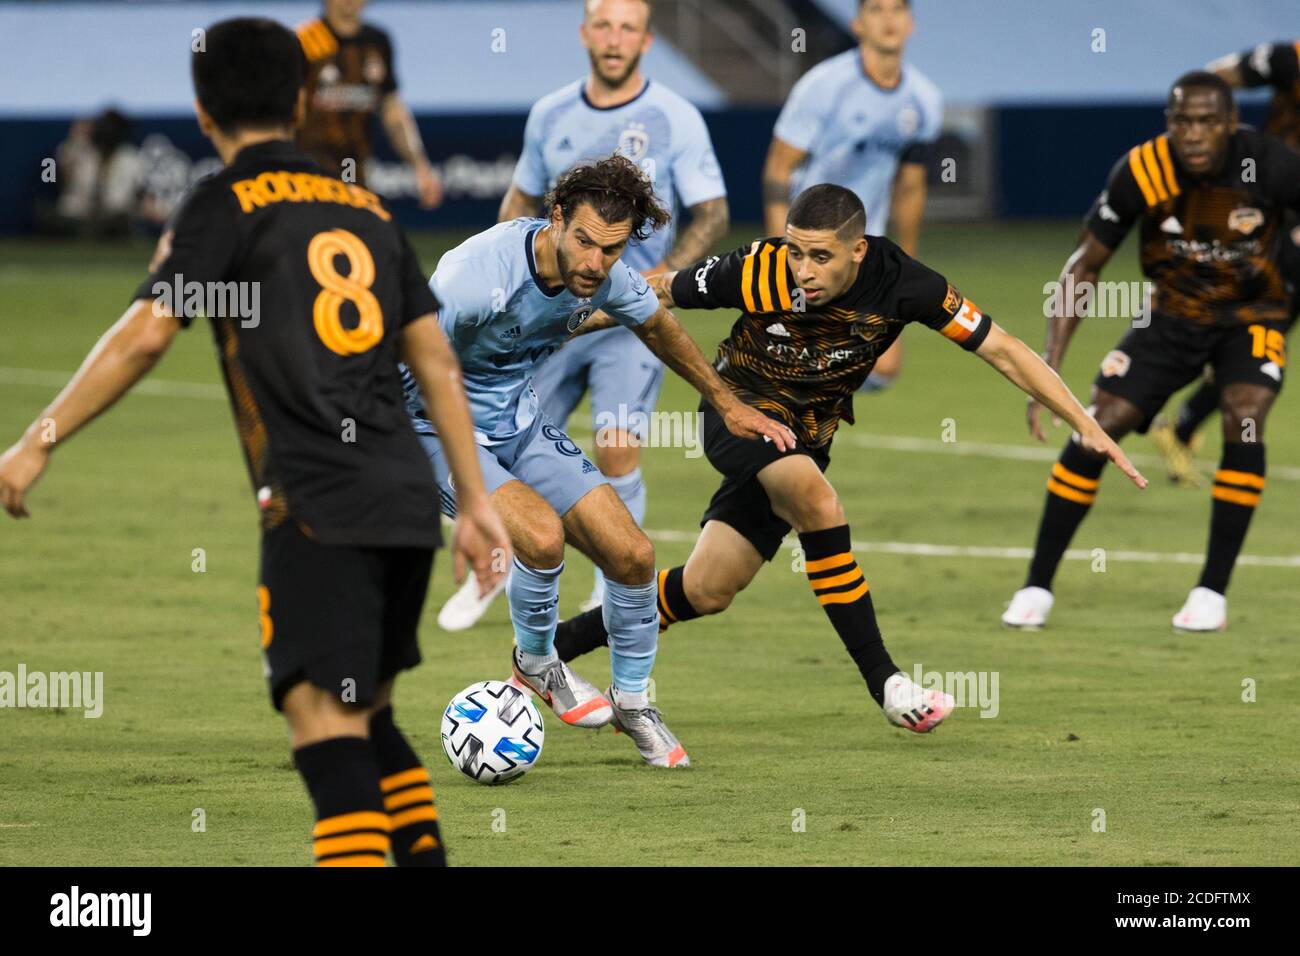 Kansas City, Kansas, USA. 25th Aug, 2020. At central action for ball possession are Sporting KC midfielder Graham Zusi #8 (l) and Houston Dynamo midfielder Matias Vera #22 (r) during the first half of the game. Credit: Serena S.Y. Hsu/ZUMA Wire/Alamy Live News Stock Photo